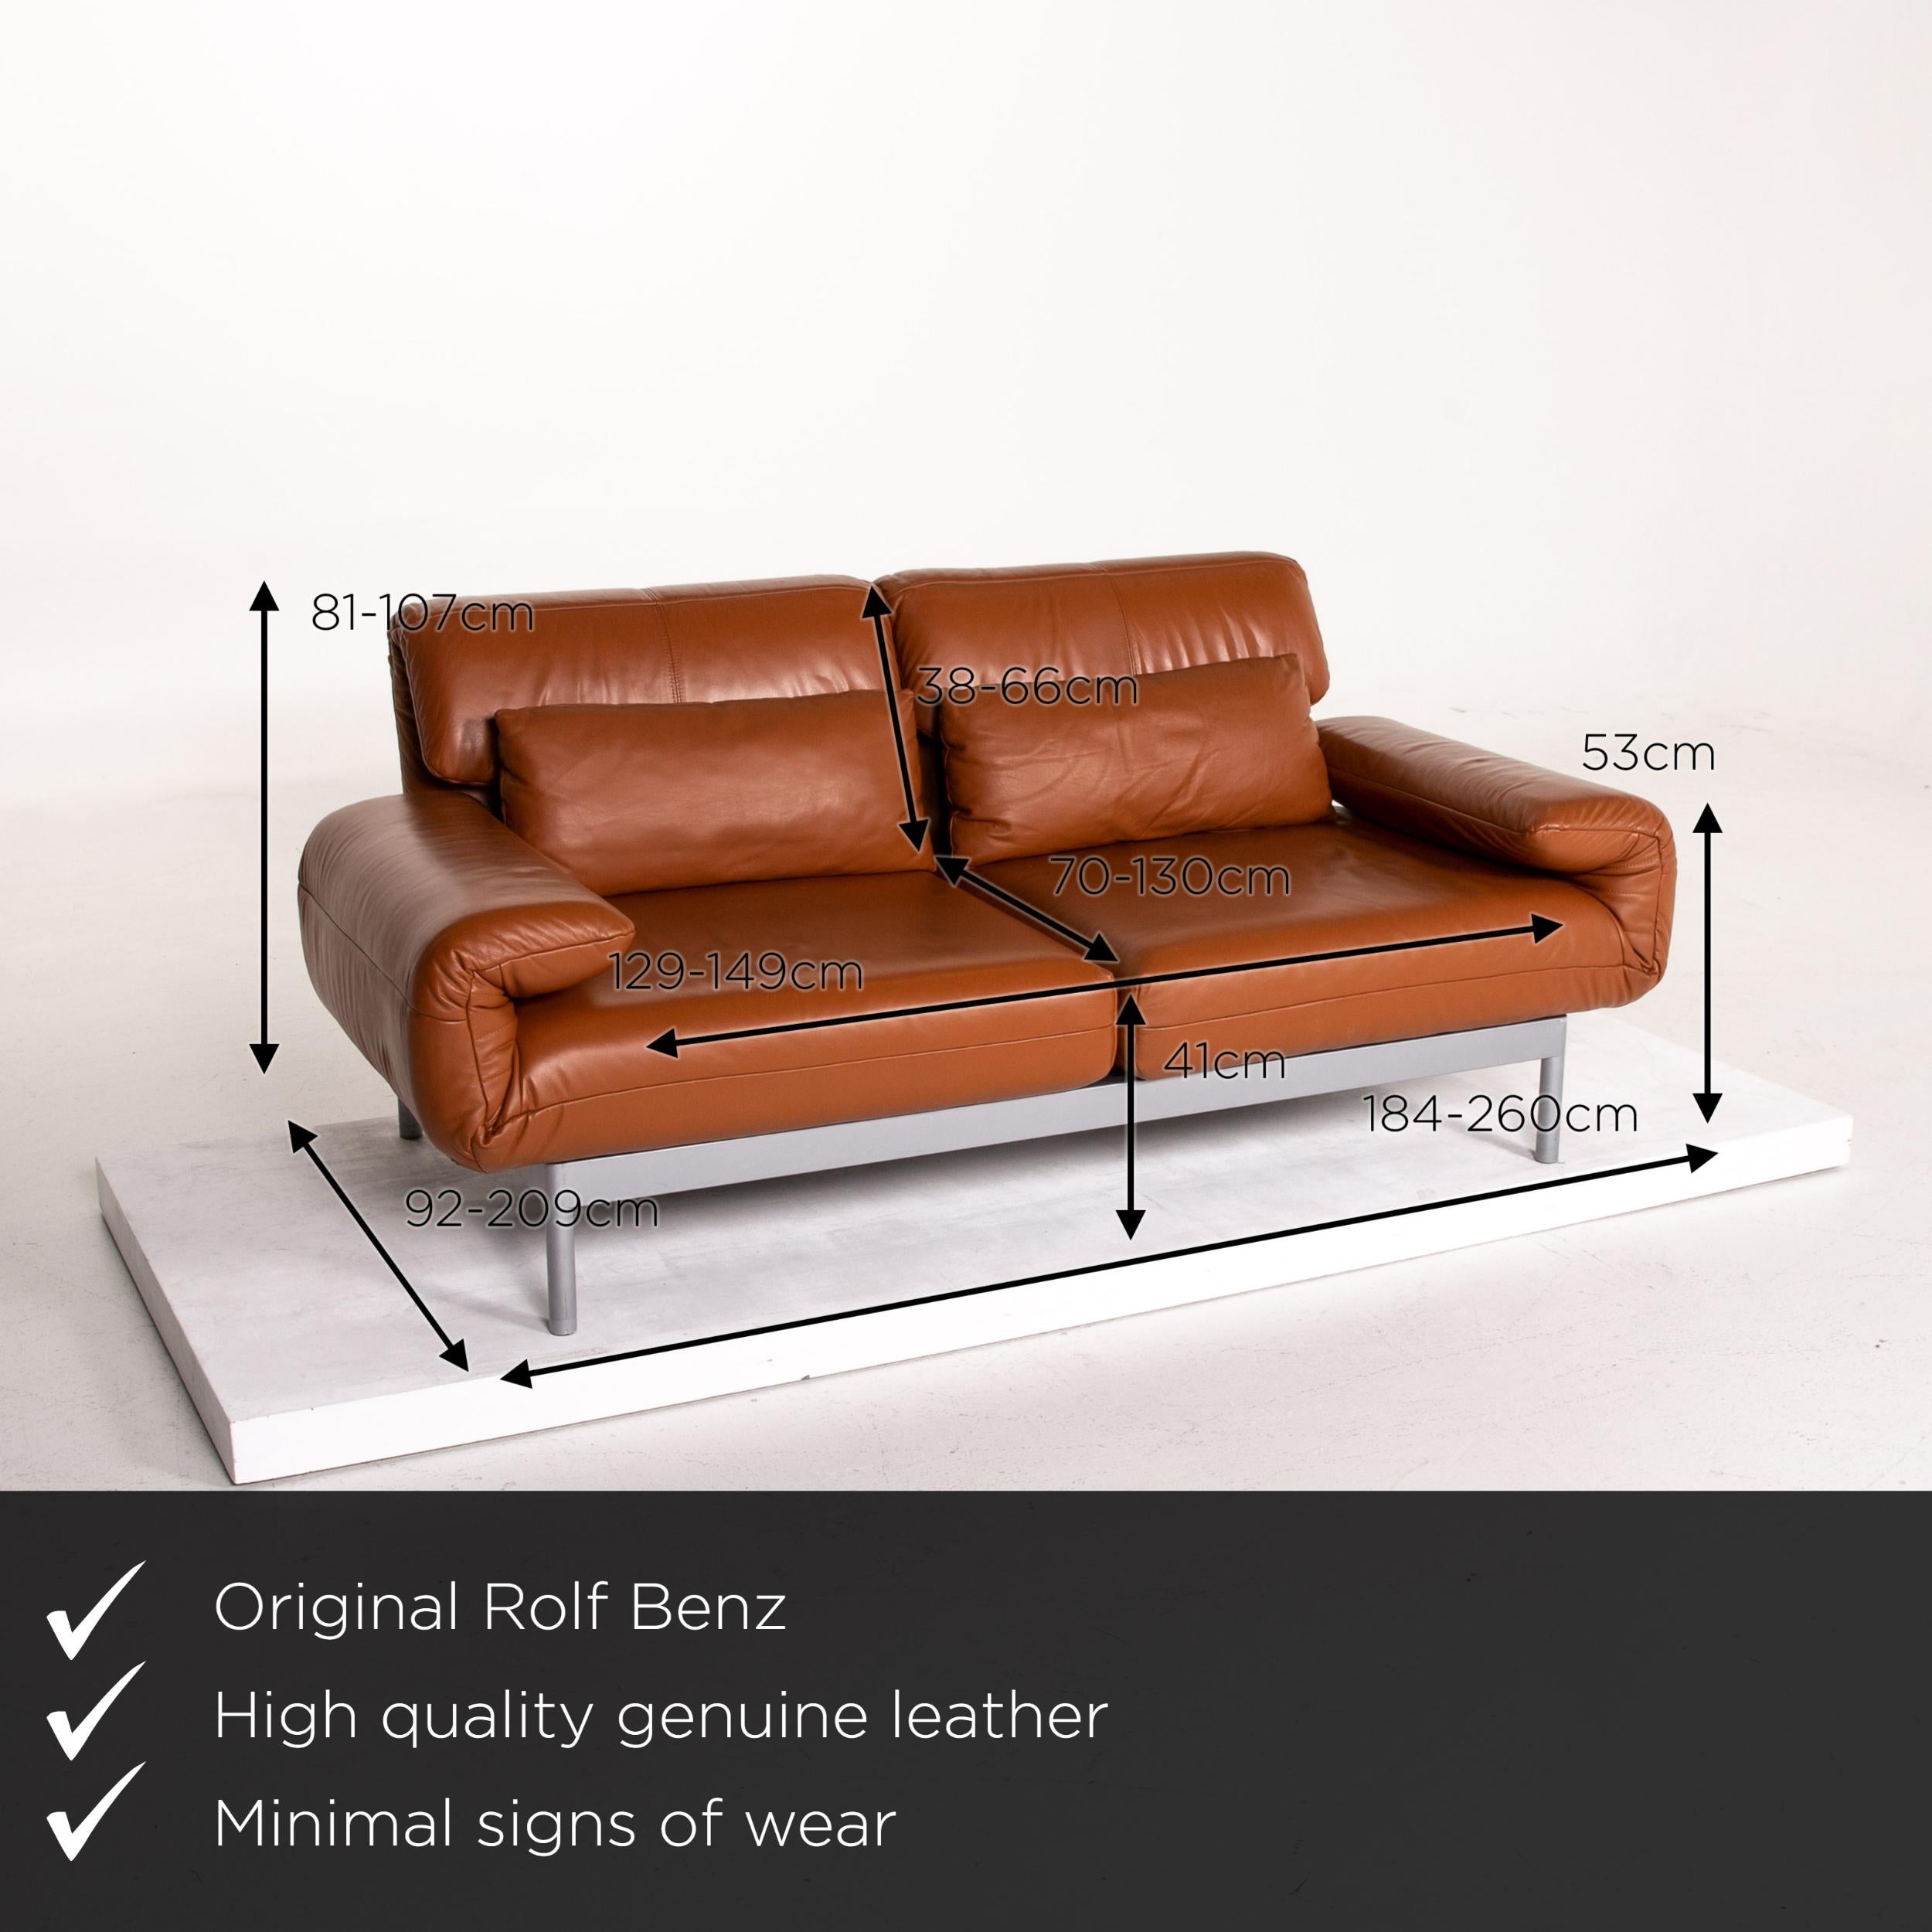 We present to you a Rolf Benz Plura leather sofa cognac brown two-seat function relax function.
  
 

 Product measurements in centimeters:
 

Depth 92
Width 184
Height 81
Seat height 41
Rest height 53
Seat depth 70
Seat width 149
Back